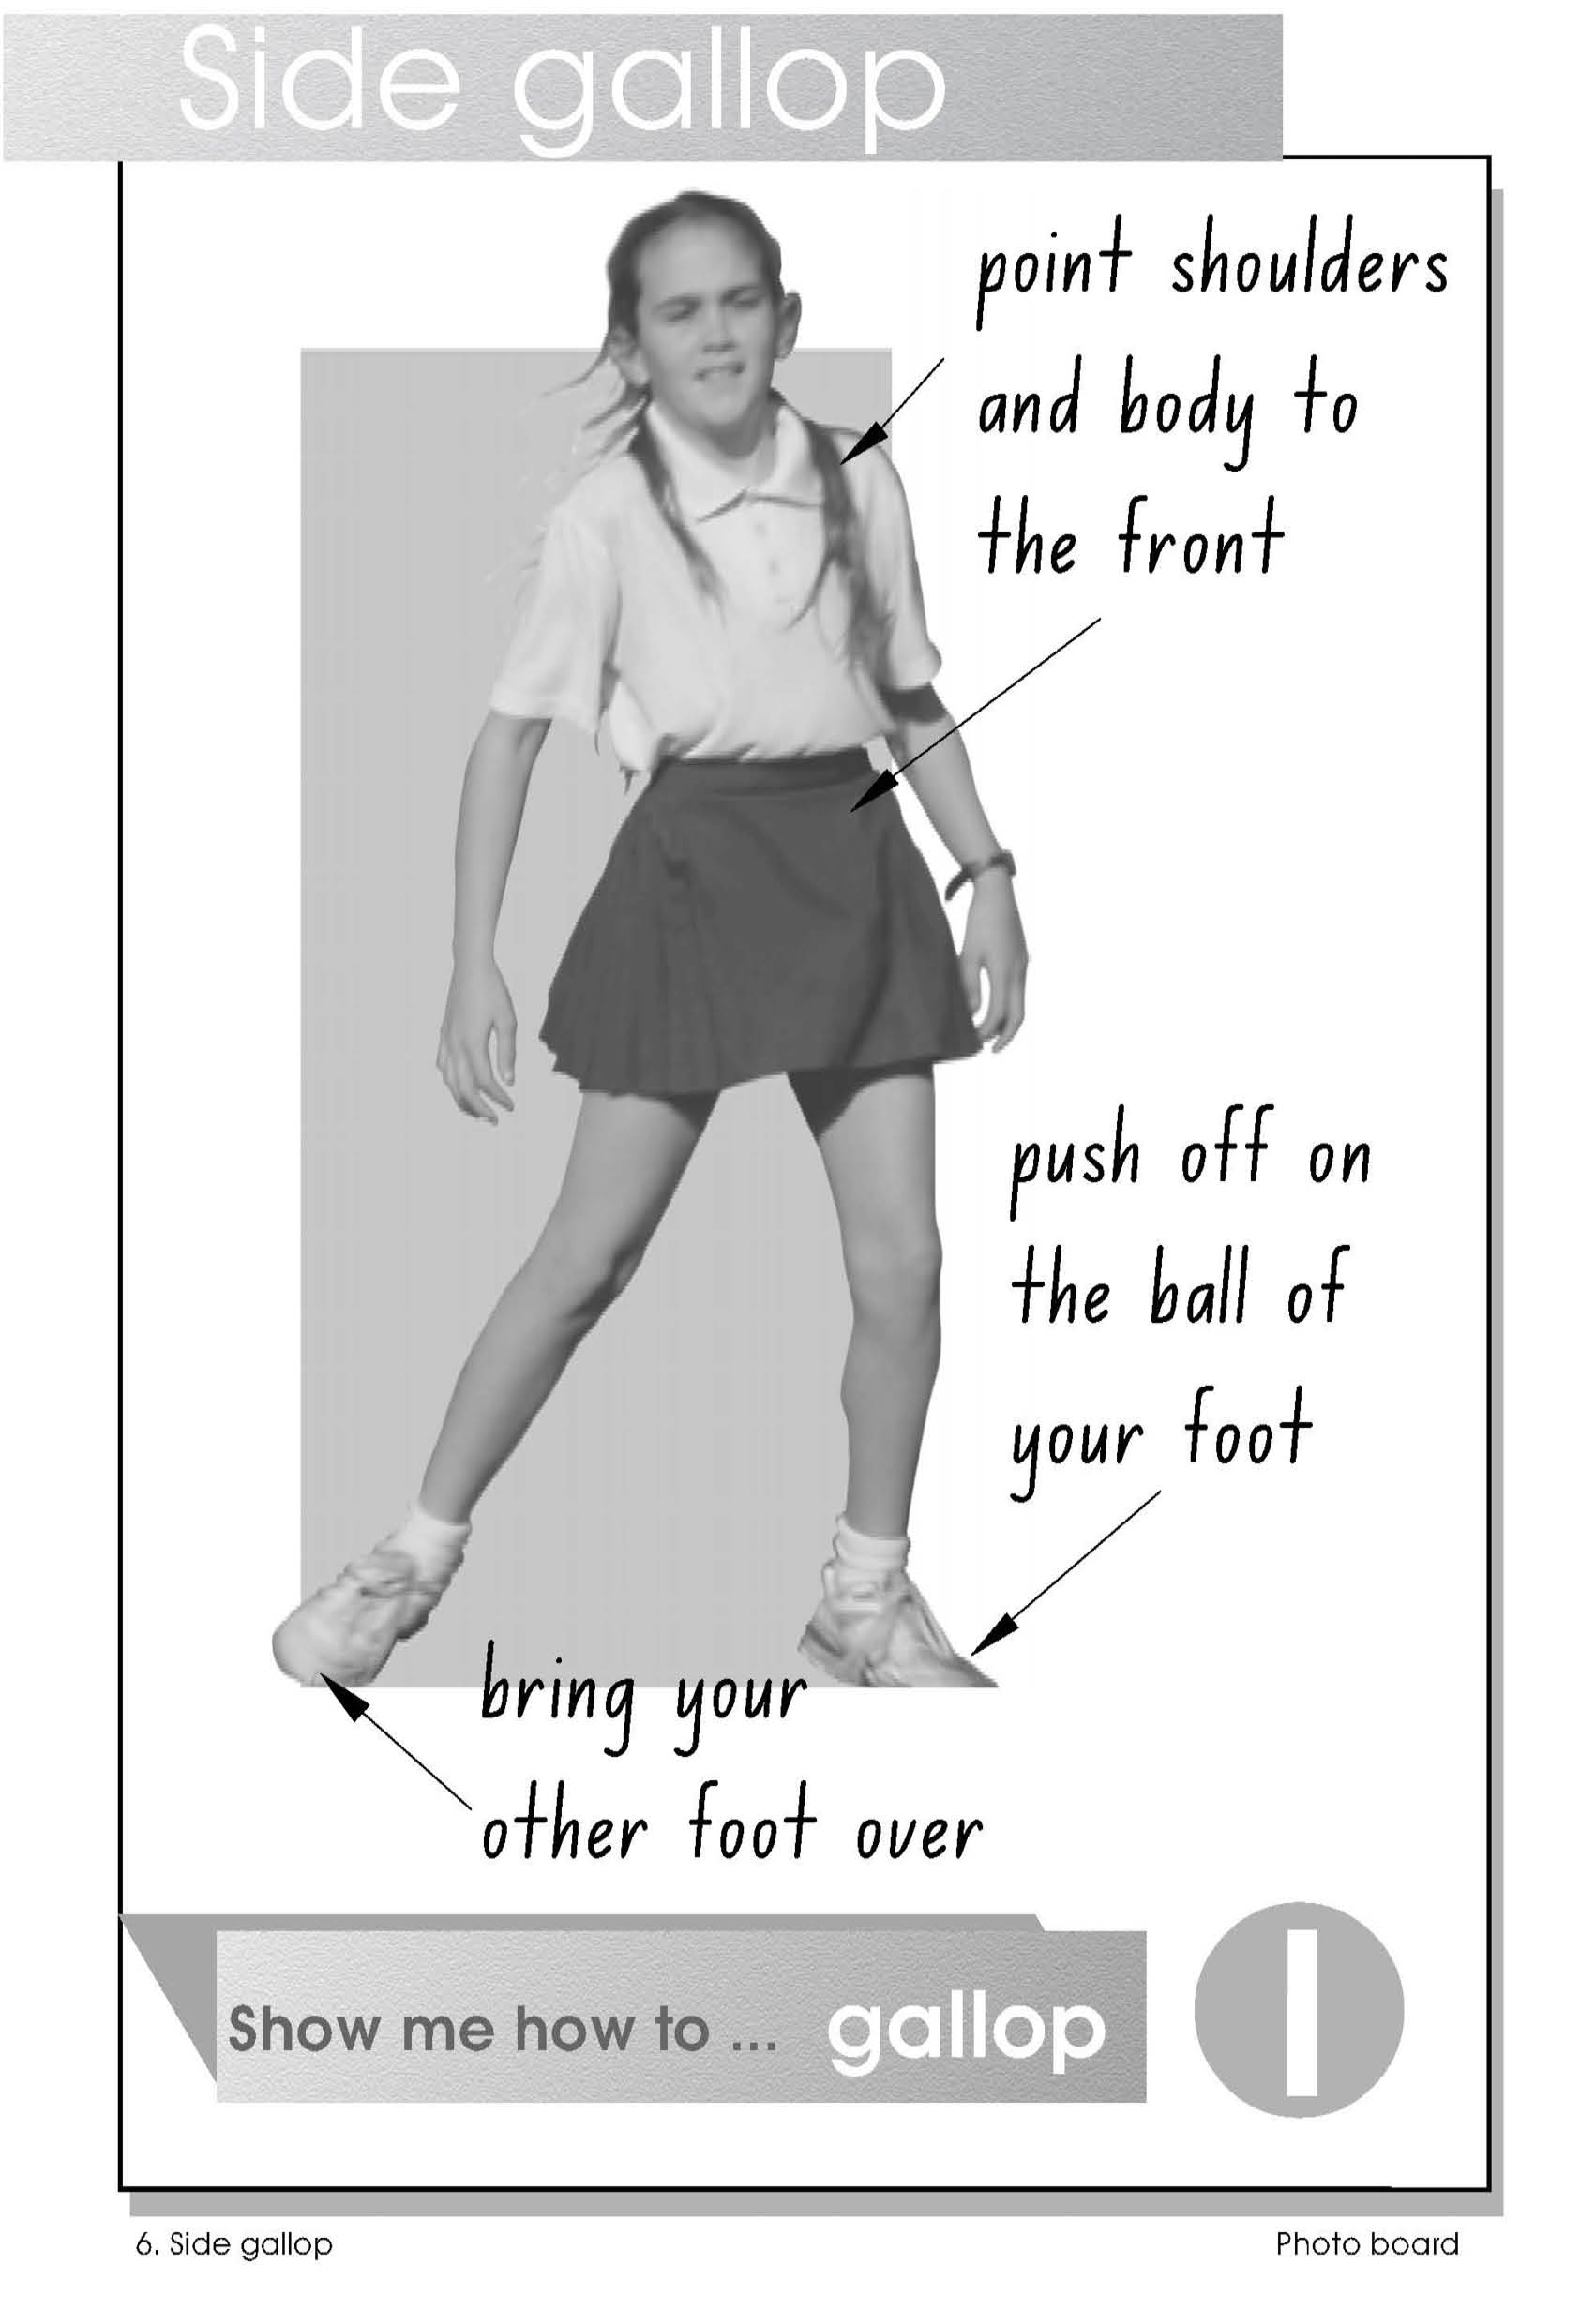 Observational poster - how to side gallop